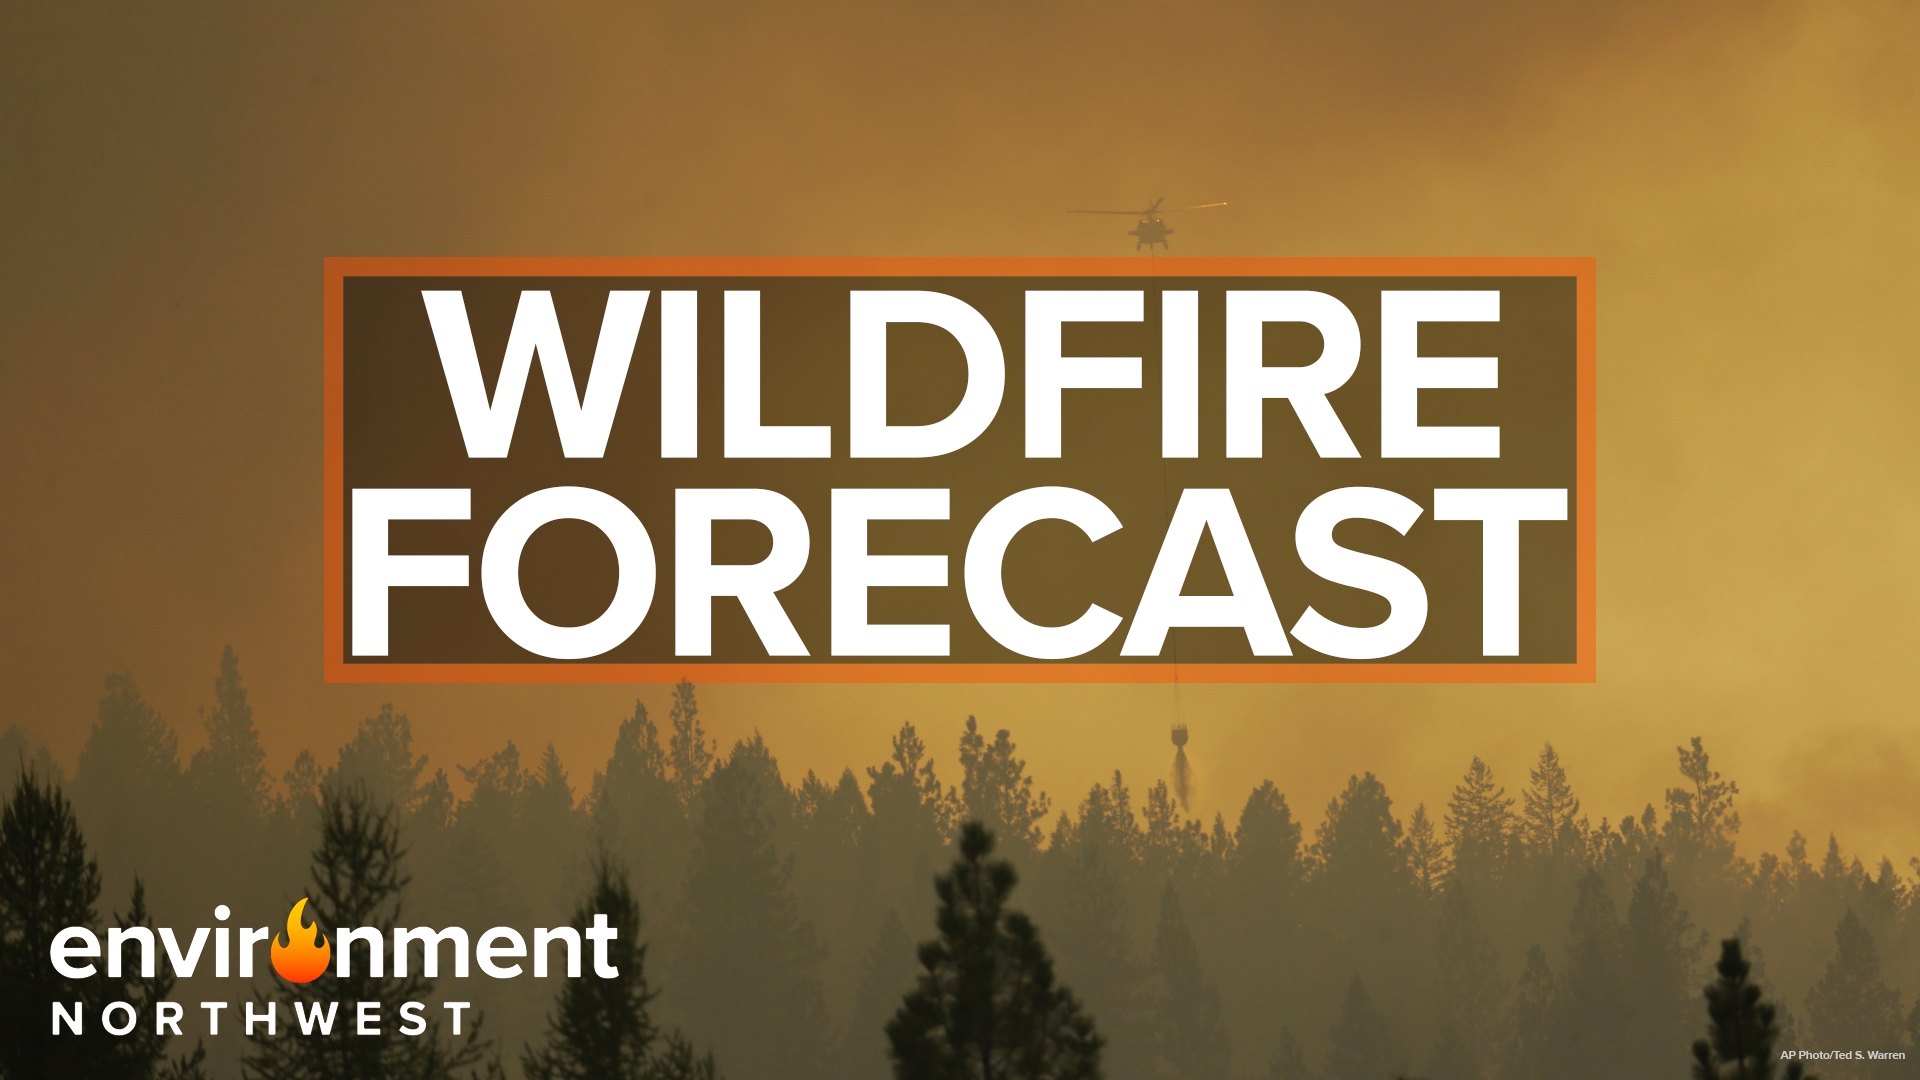 While conditions vary across the Northwest, from Washington to Oregon to Idaho, each area still faces significant fire risk this summer.